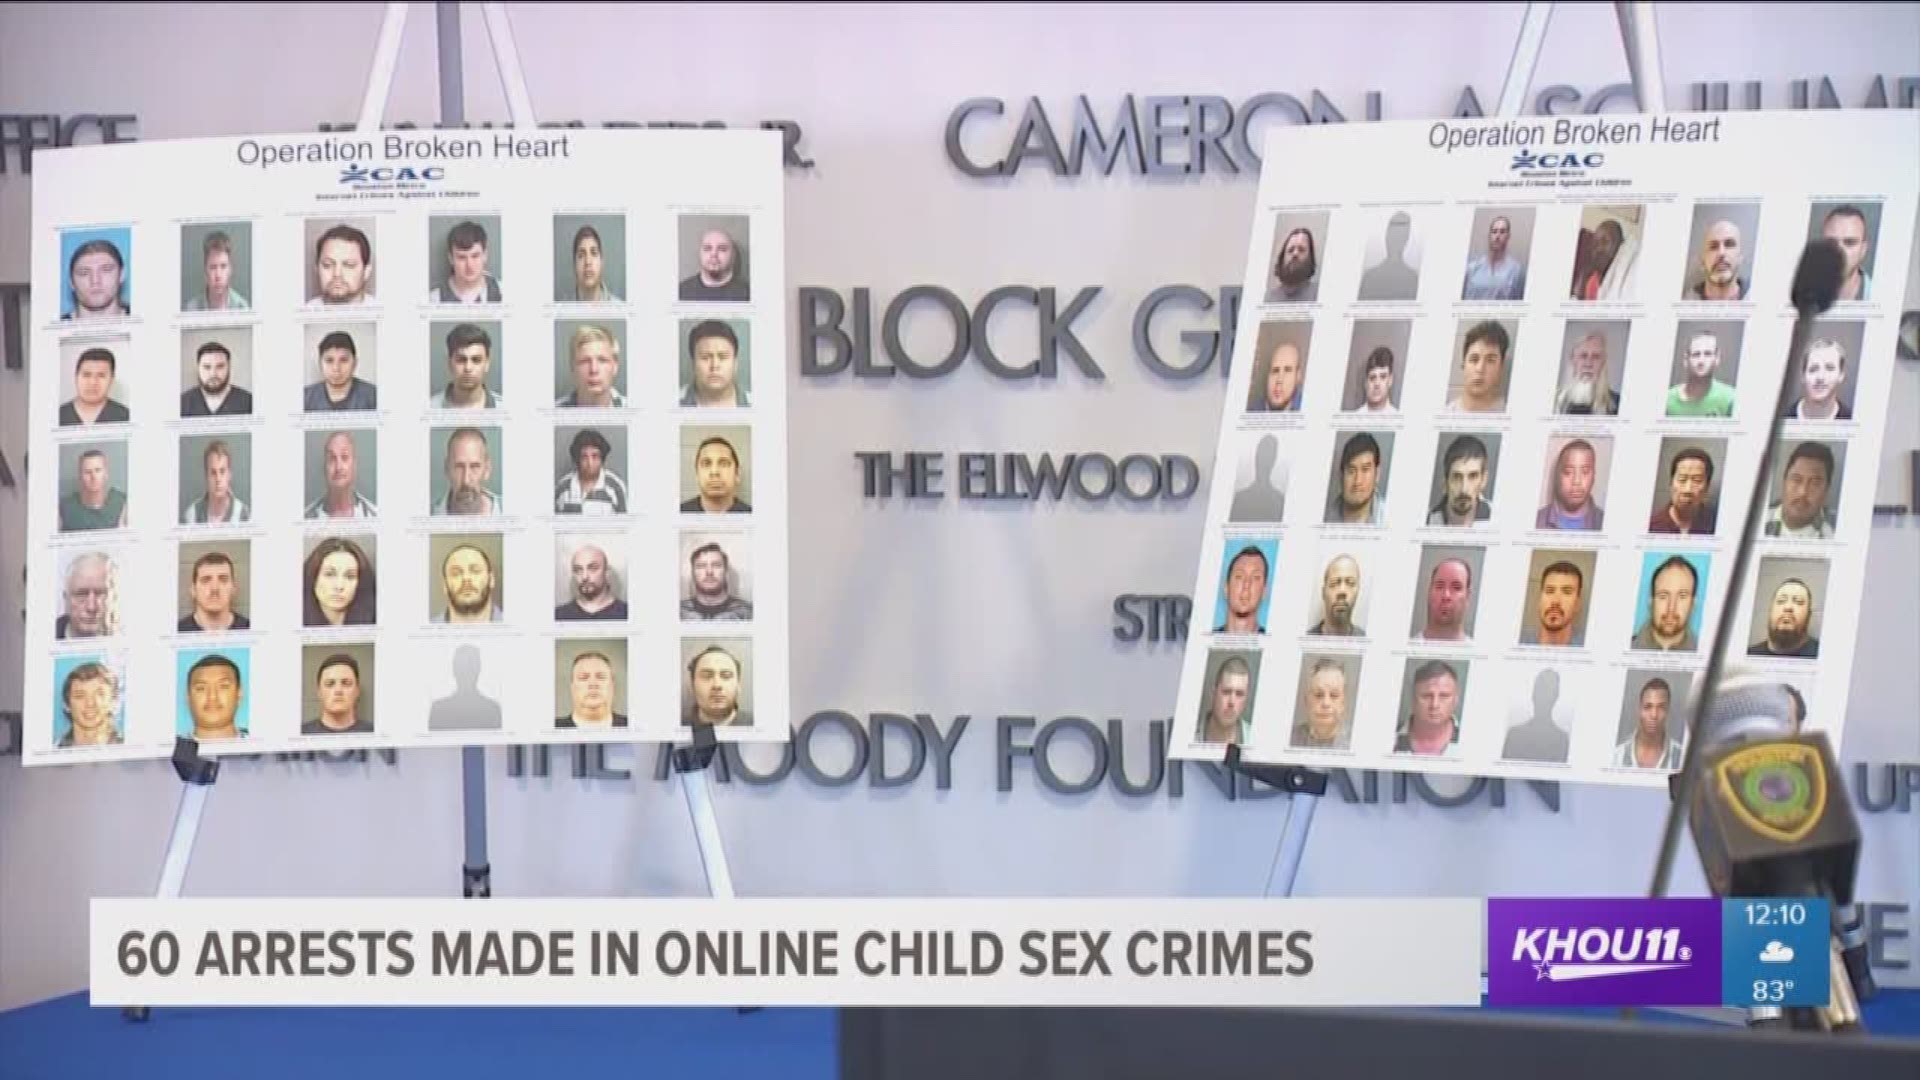 More than 150 charges have been filed against people trying to victimize children. Houston Metro Internet Crimes Against Children announced the results of it three-month long multi-agency investigation into online sexual exploitation of children.